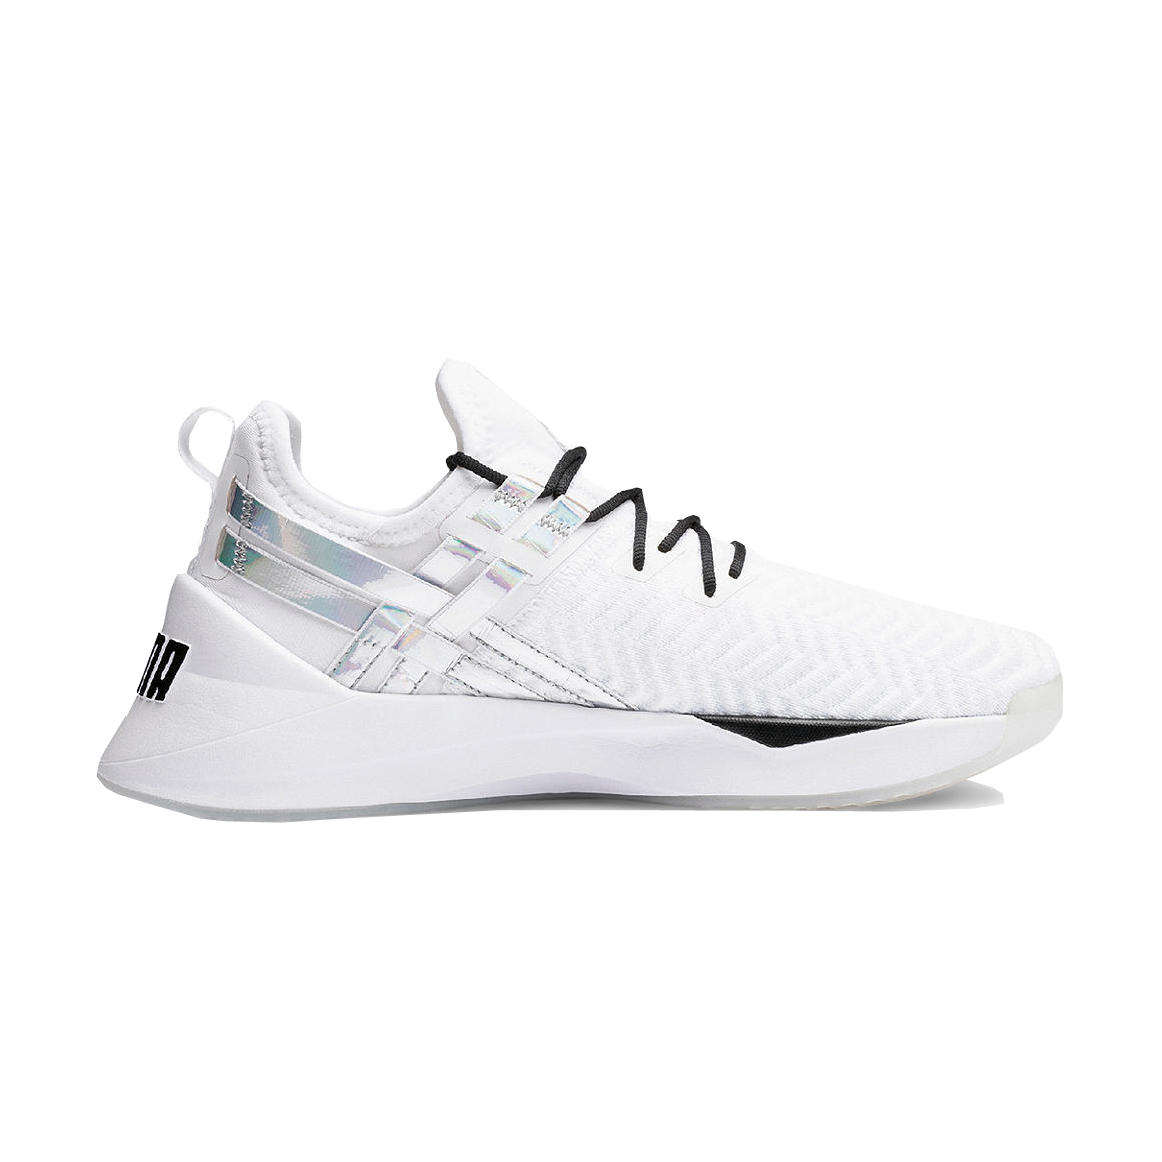 white workout shoes womens